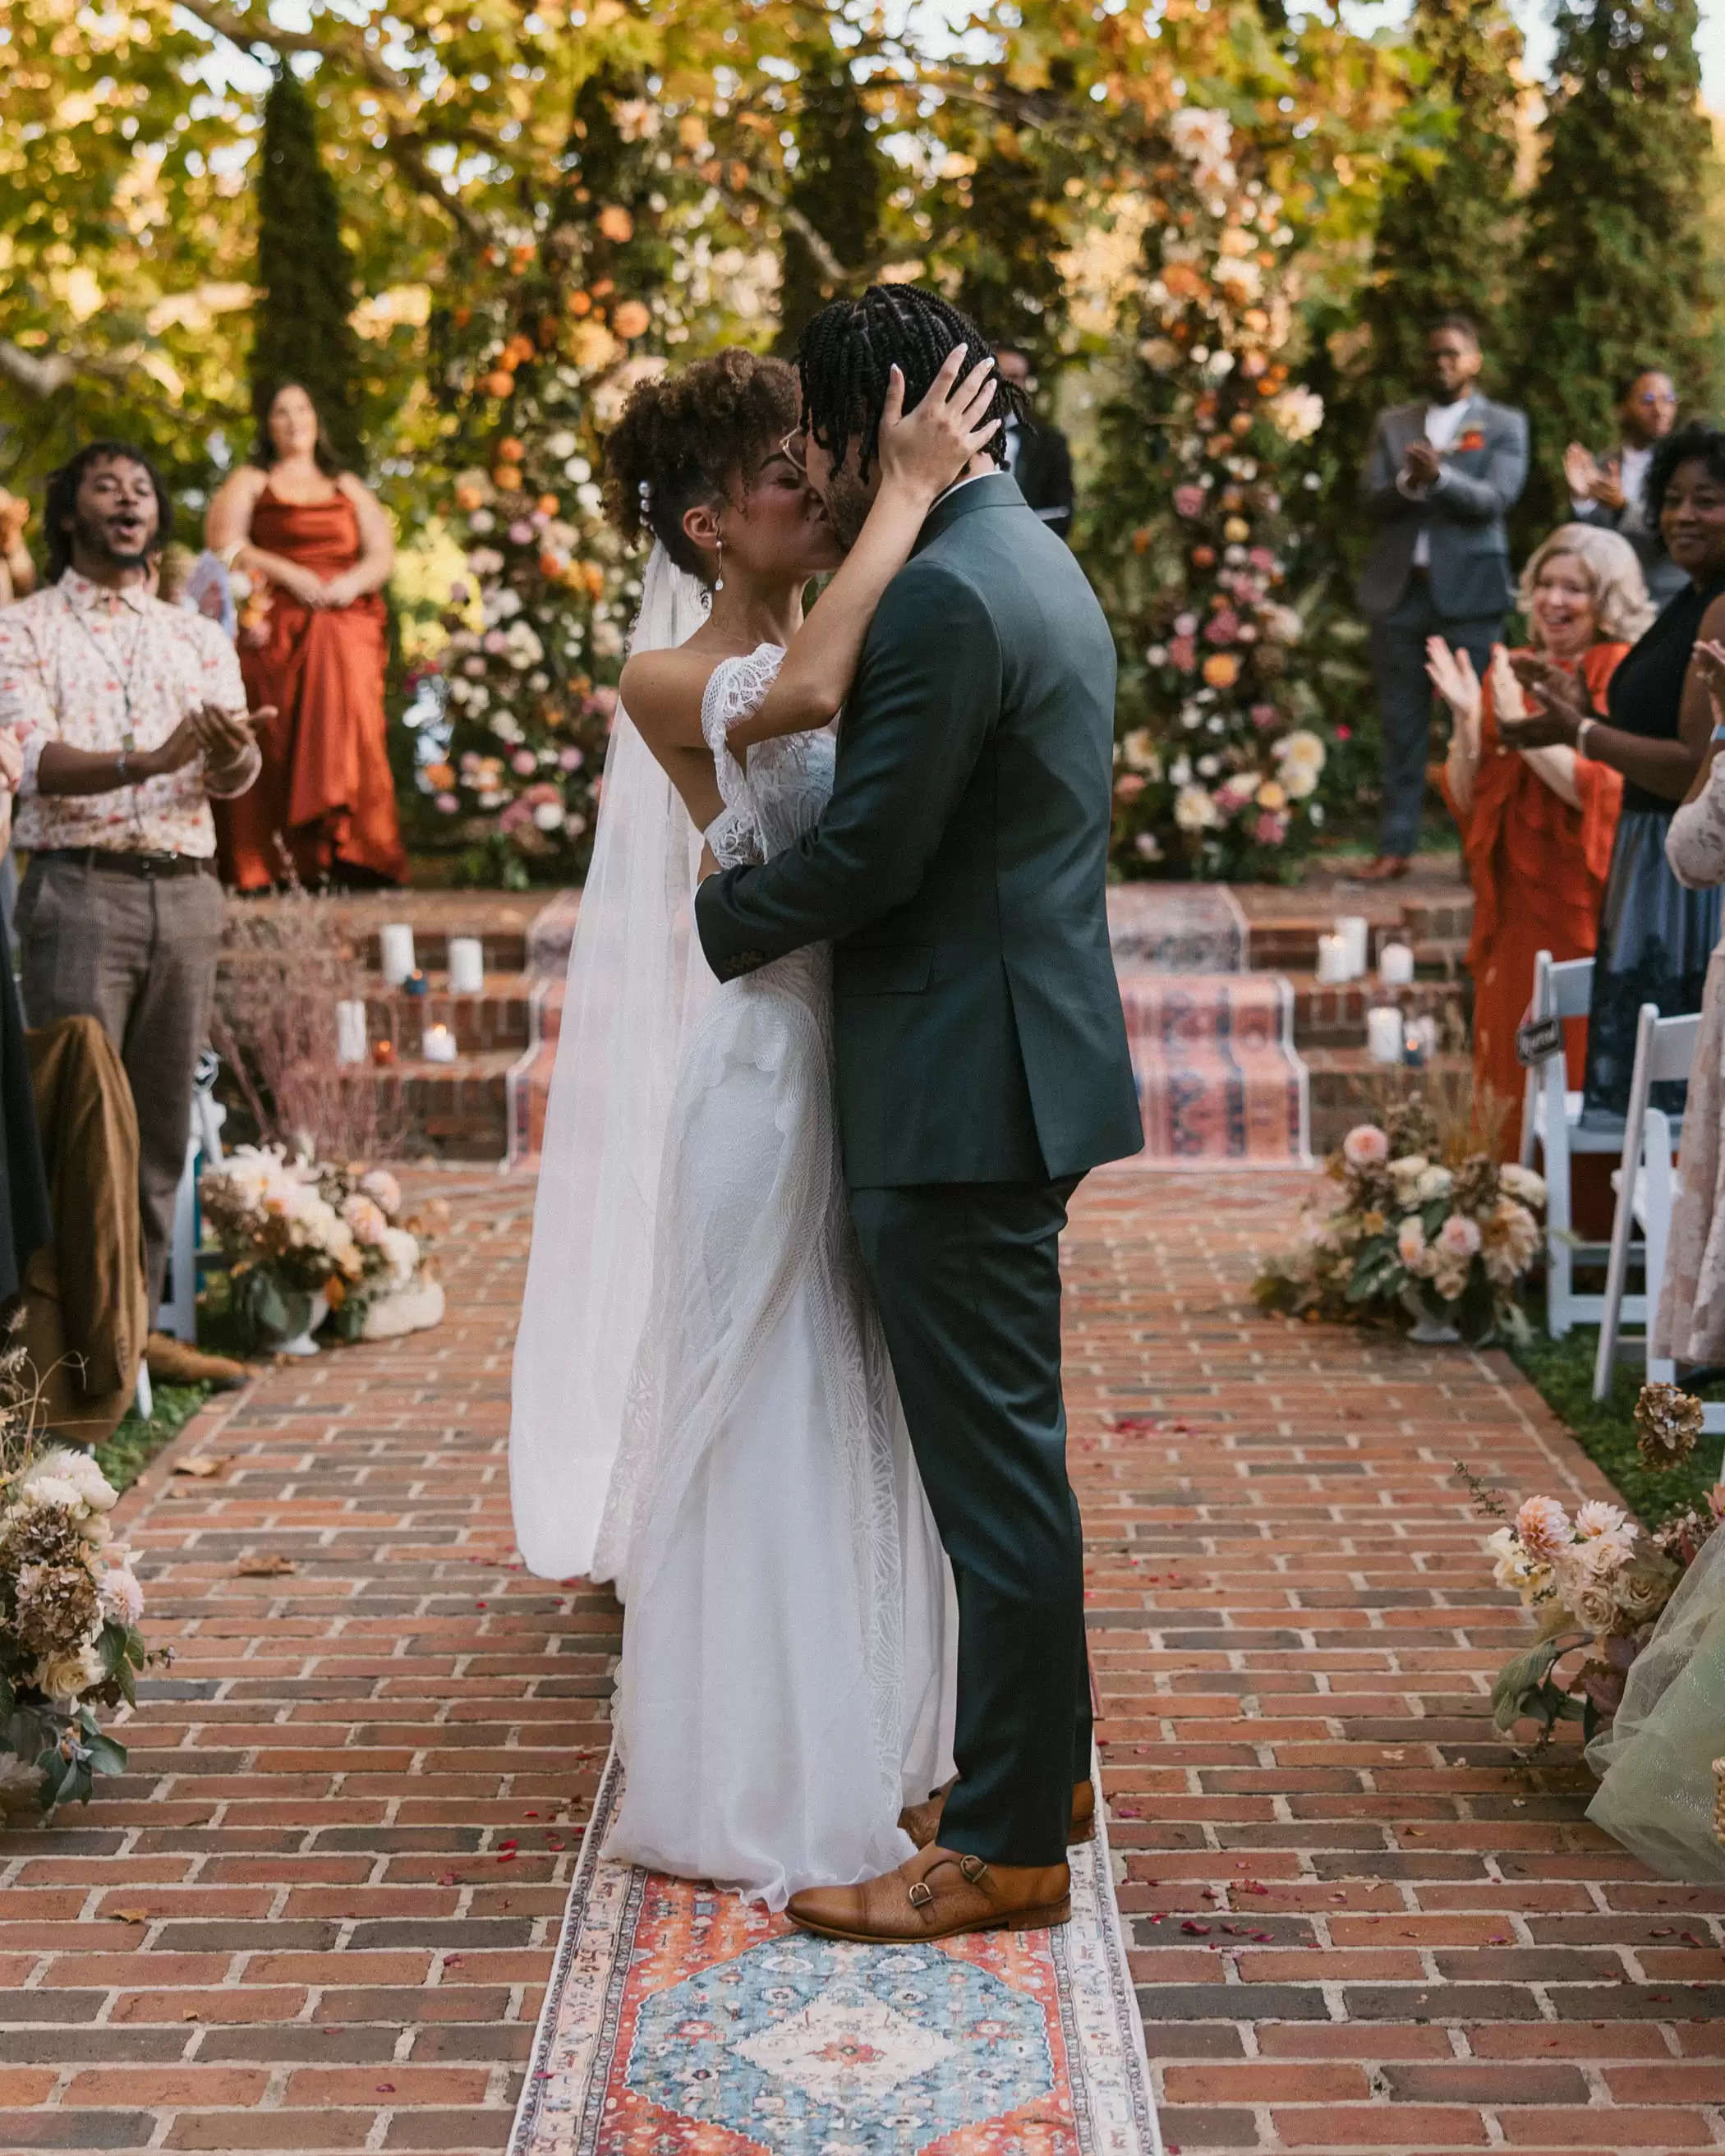 The Bride Was Barefoot For This Free-Spirited Fall Marriage ceremony